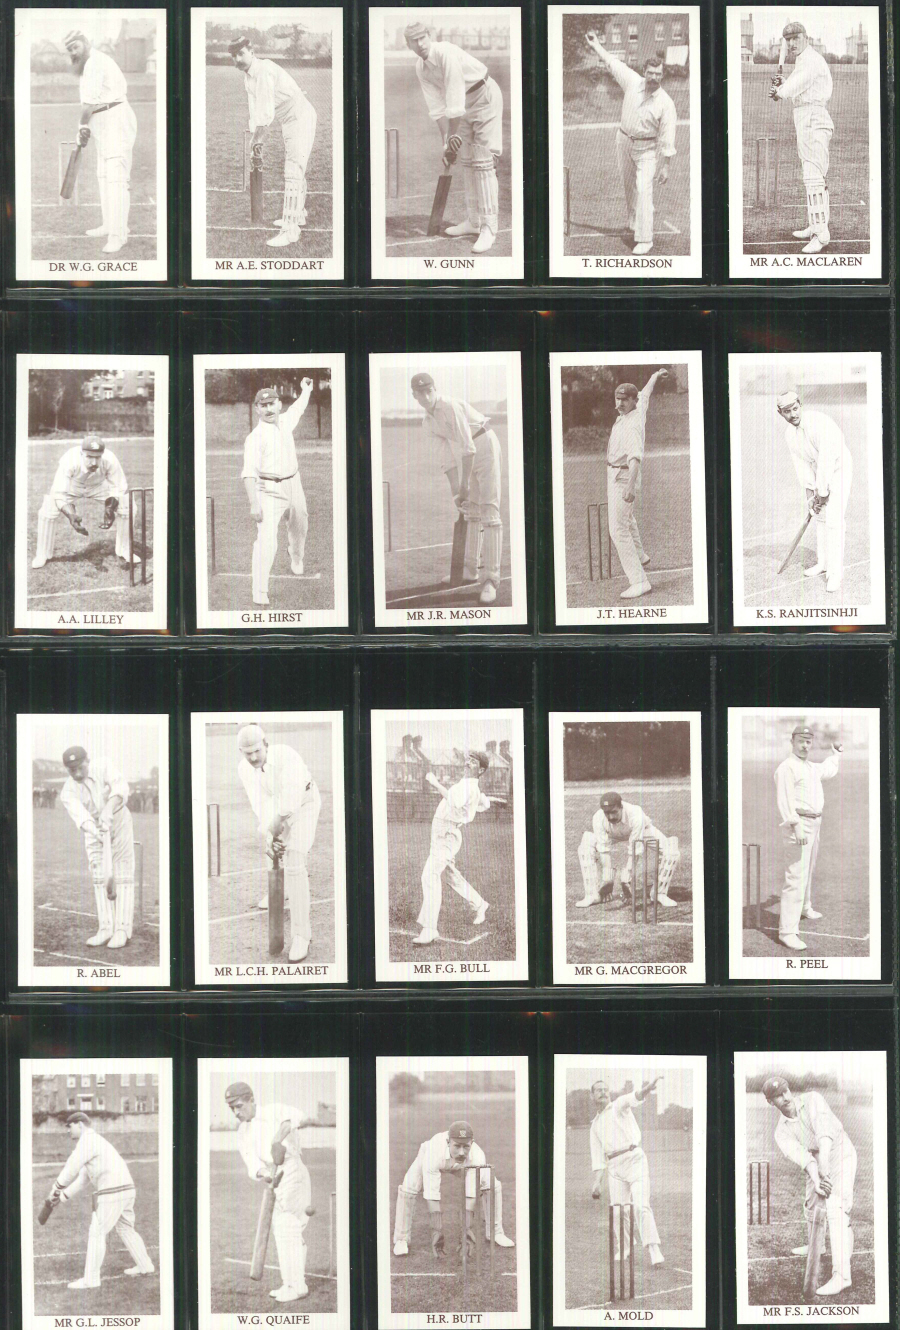 County Print - Cricketerers of 1896 - Set of 50